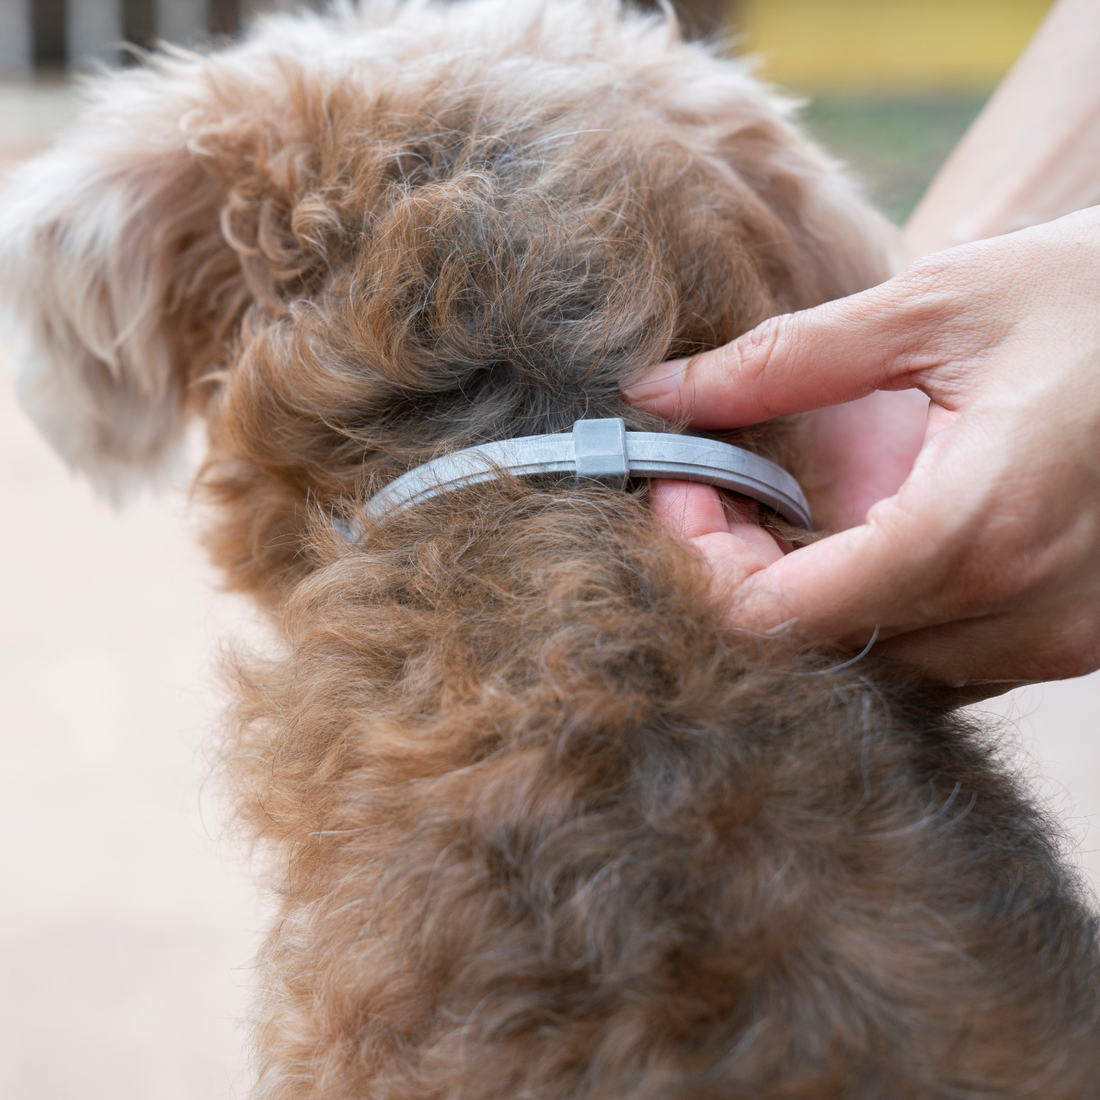 How To Fight Ticks and Fleas on Dogs